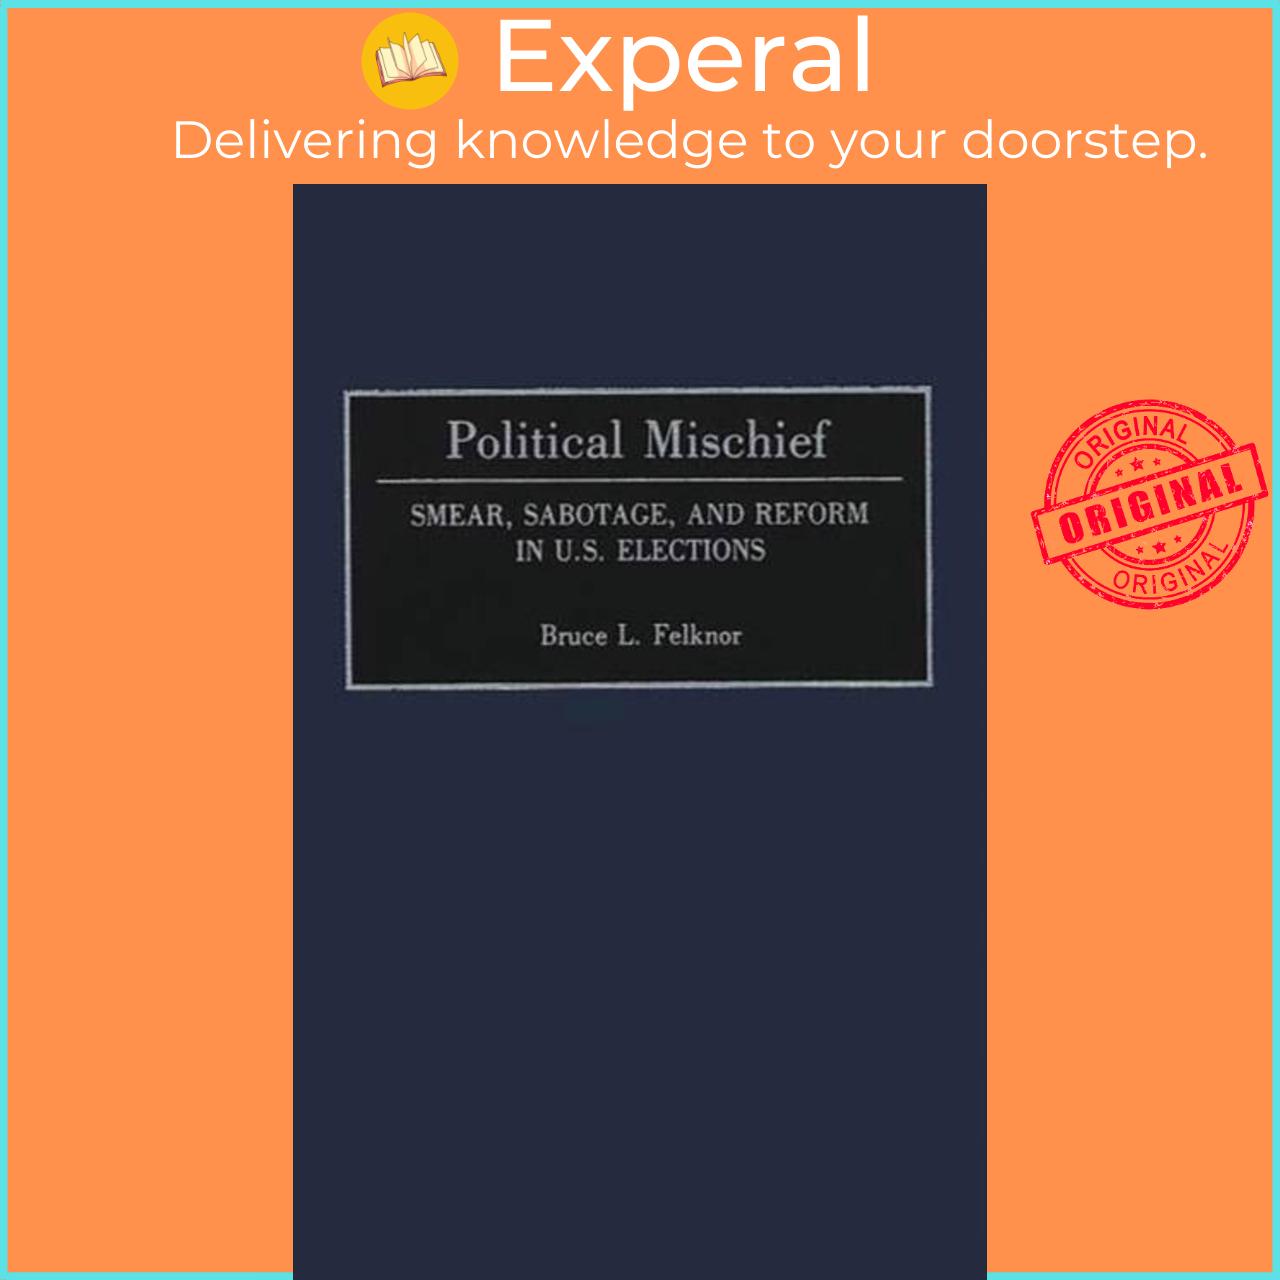 Hình ảnh Sách - Political Mischief - Smear, Sabotage, and Reform in U.S. Elections by Bruce L. Felknor (UK edition, hardcover)